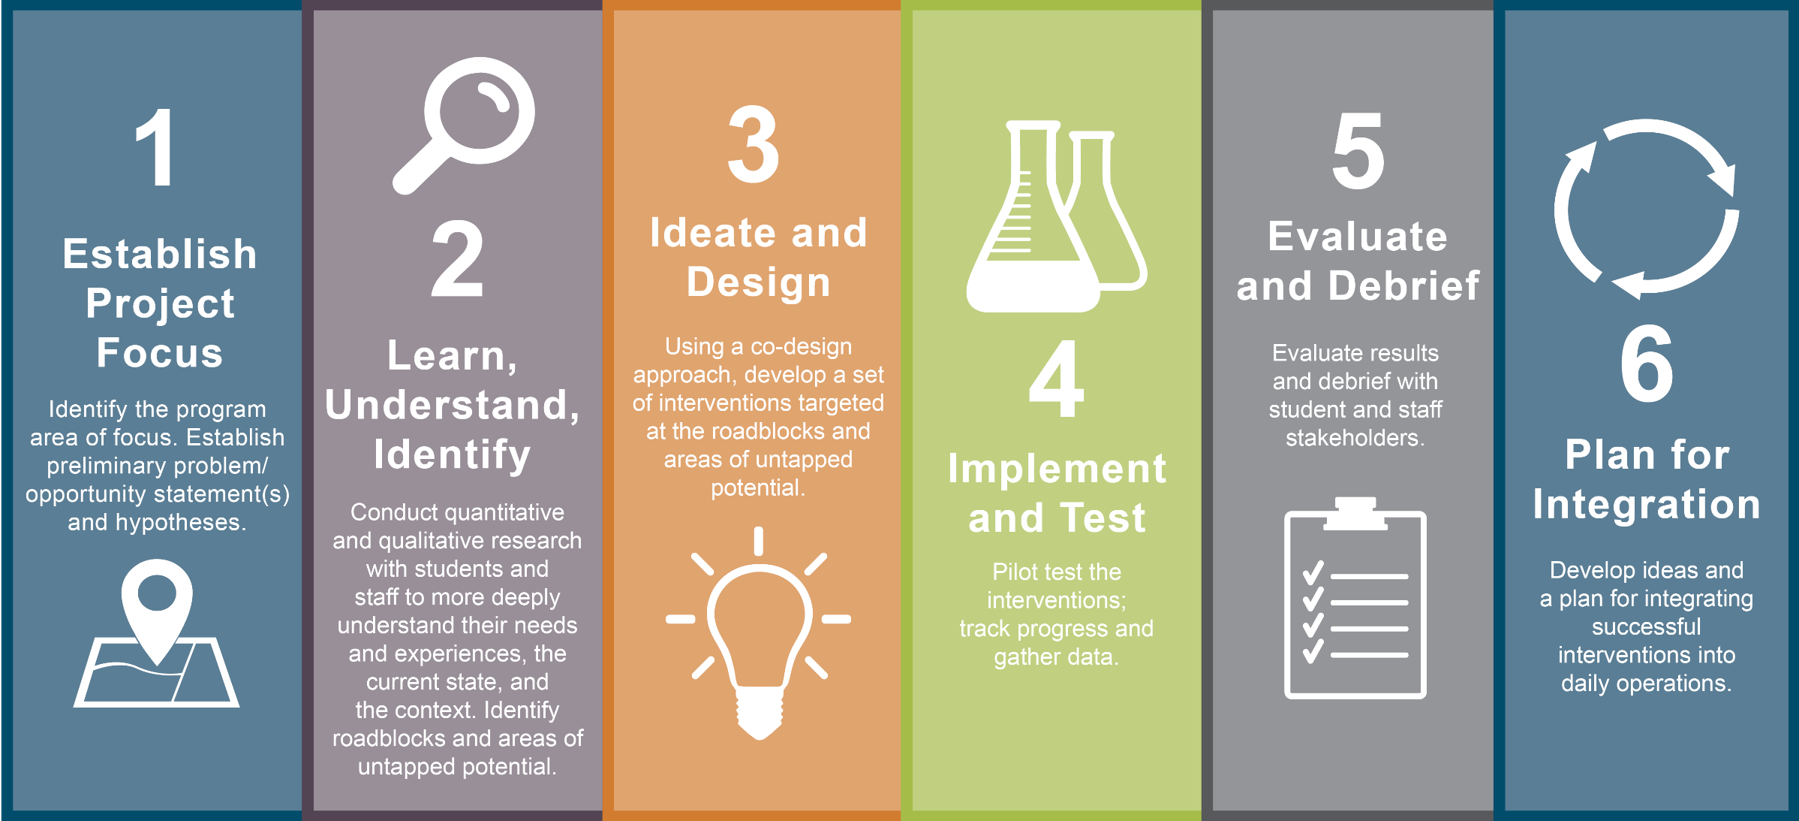 Graphic showing the Student-Centered Design 6-step process, which includes: 1) Establish Project Focus, 2) Learn, Understand, Identify, 3) Ideate and Design, 4) Implement and Test, 5) Evaluate and Debrief, 6) Plan for Integration